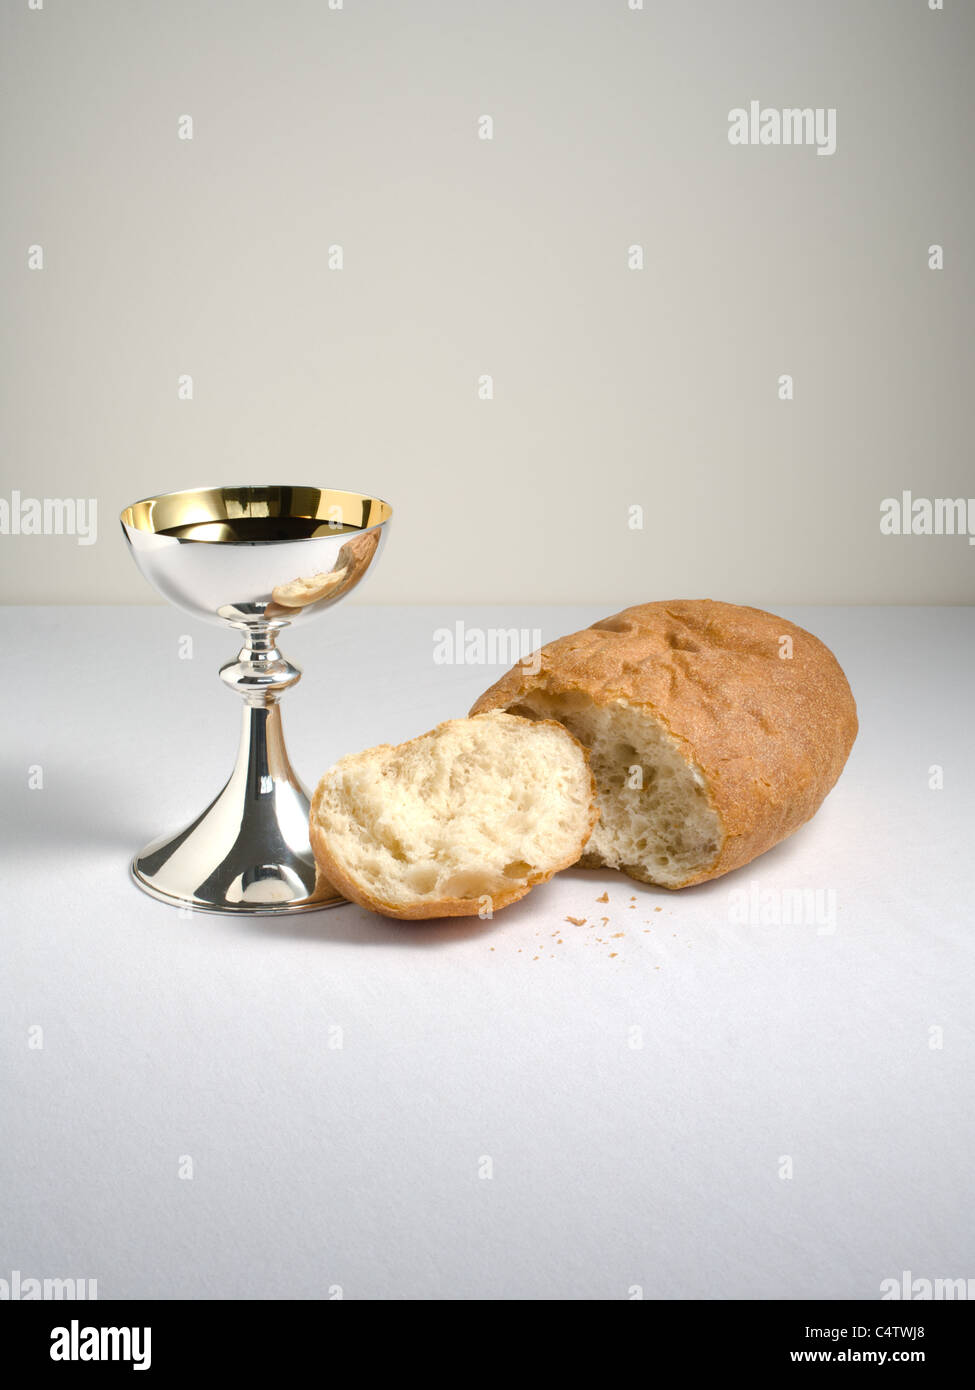 Holy Communion cup (chalice) with wine and broken loaf of bread, for celebration of Christian Holy Communion. Stock Photo